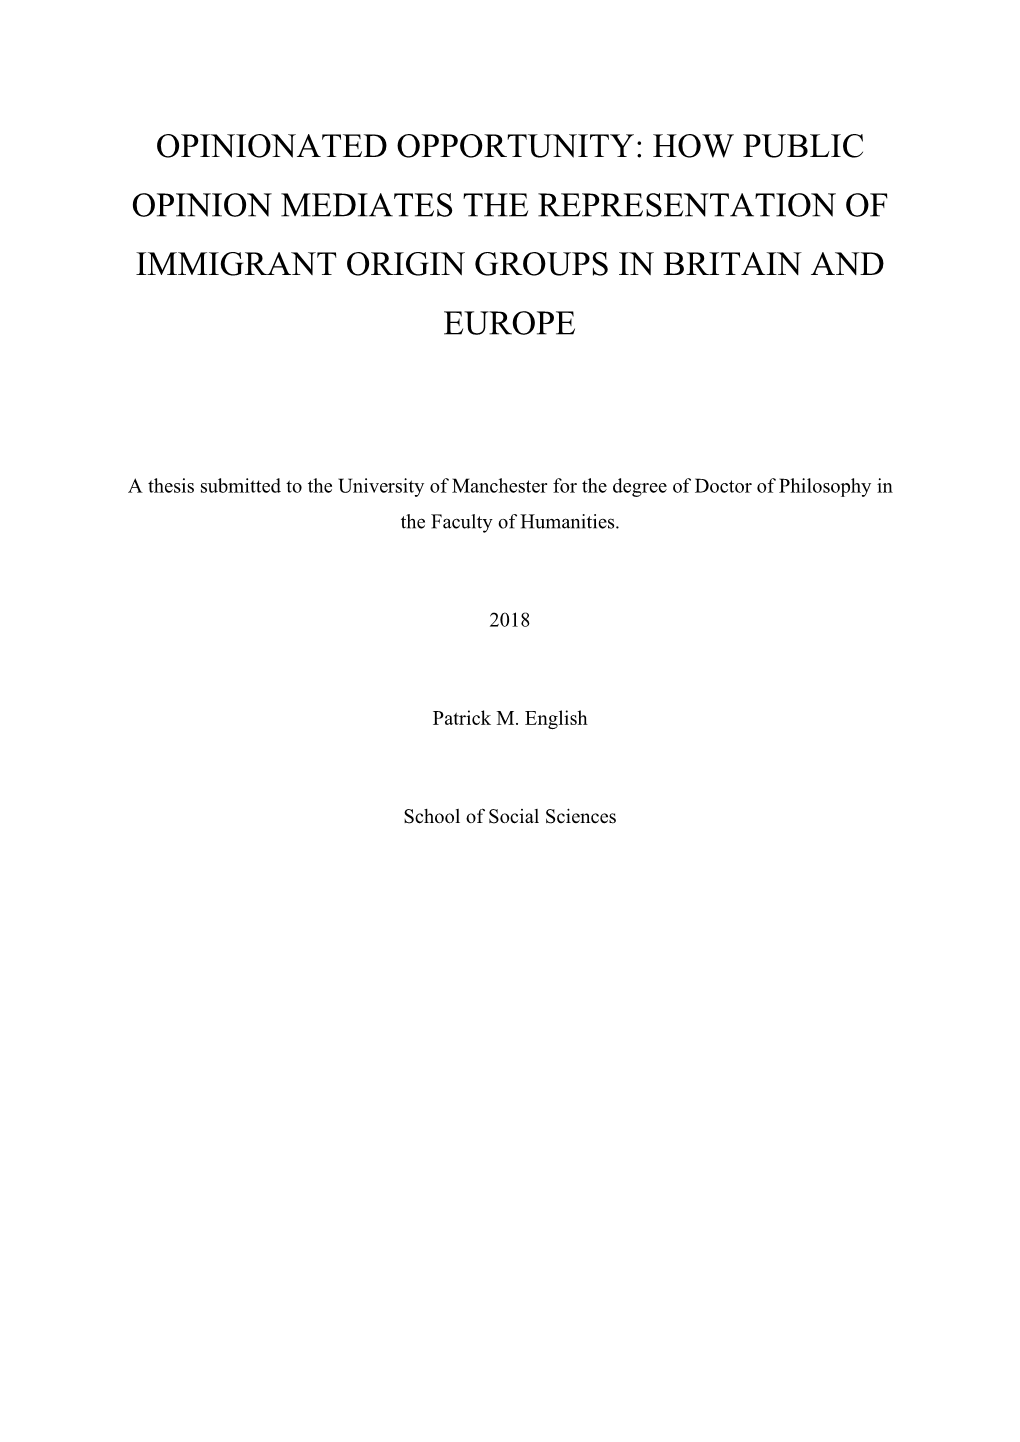 Opinionated Opportunity: How Public Opinion Mediates the Representation of Immigrant Origin Groups in Britain and Europe